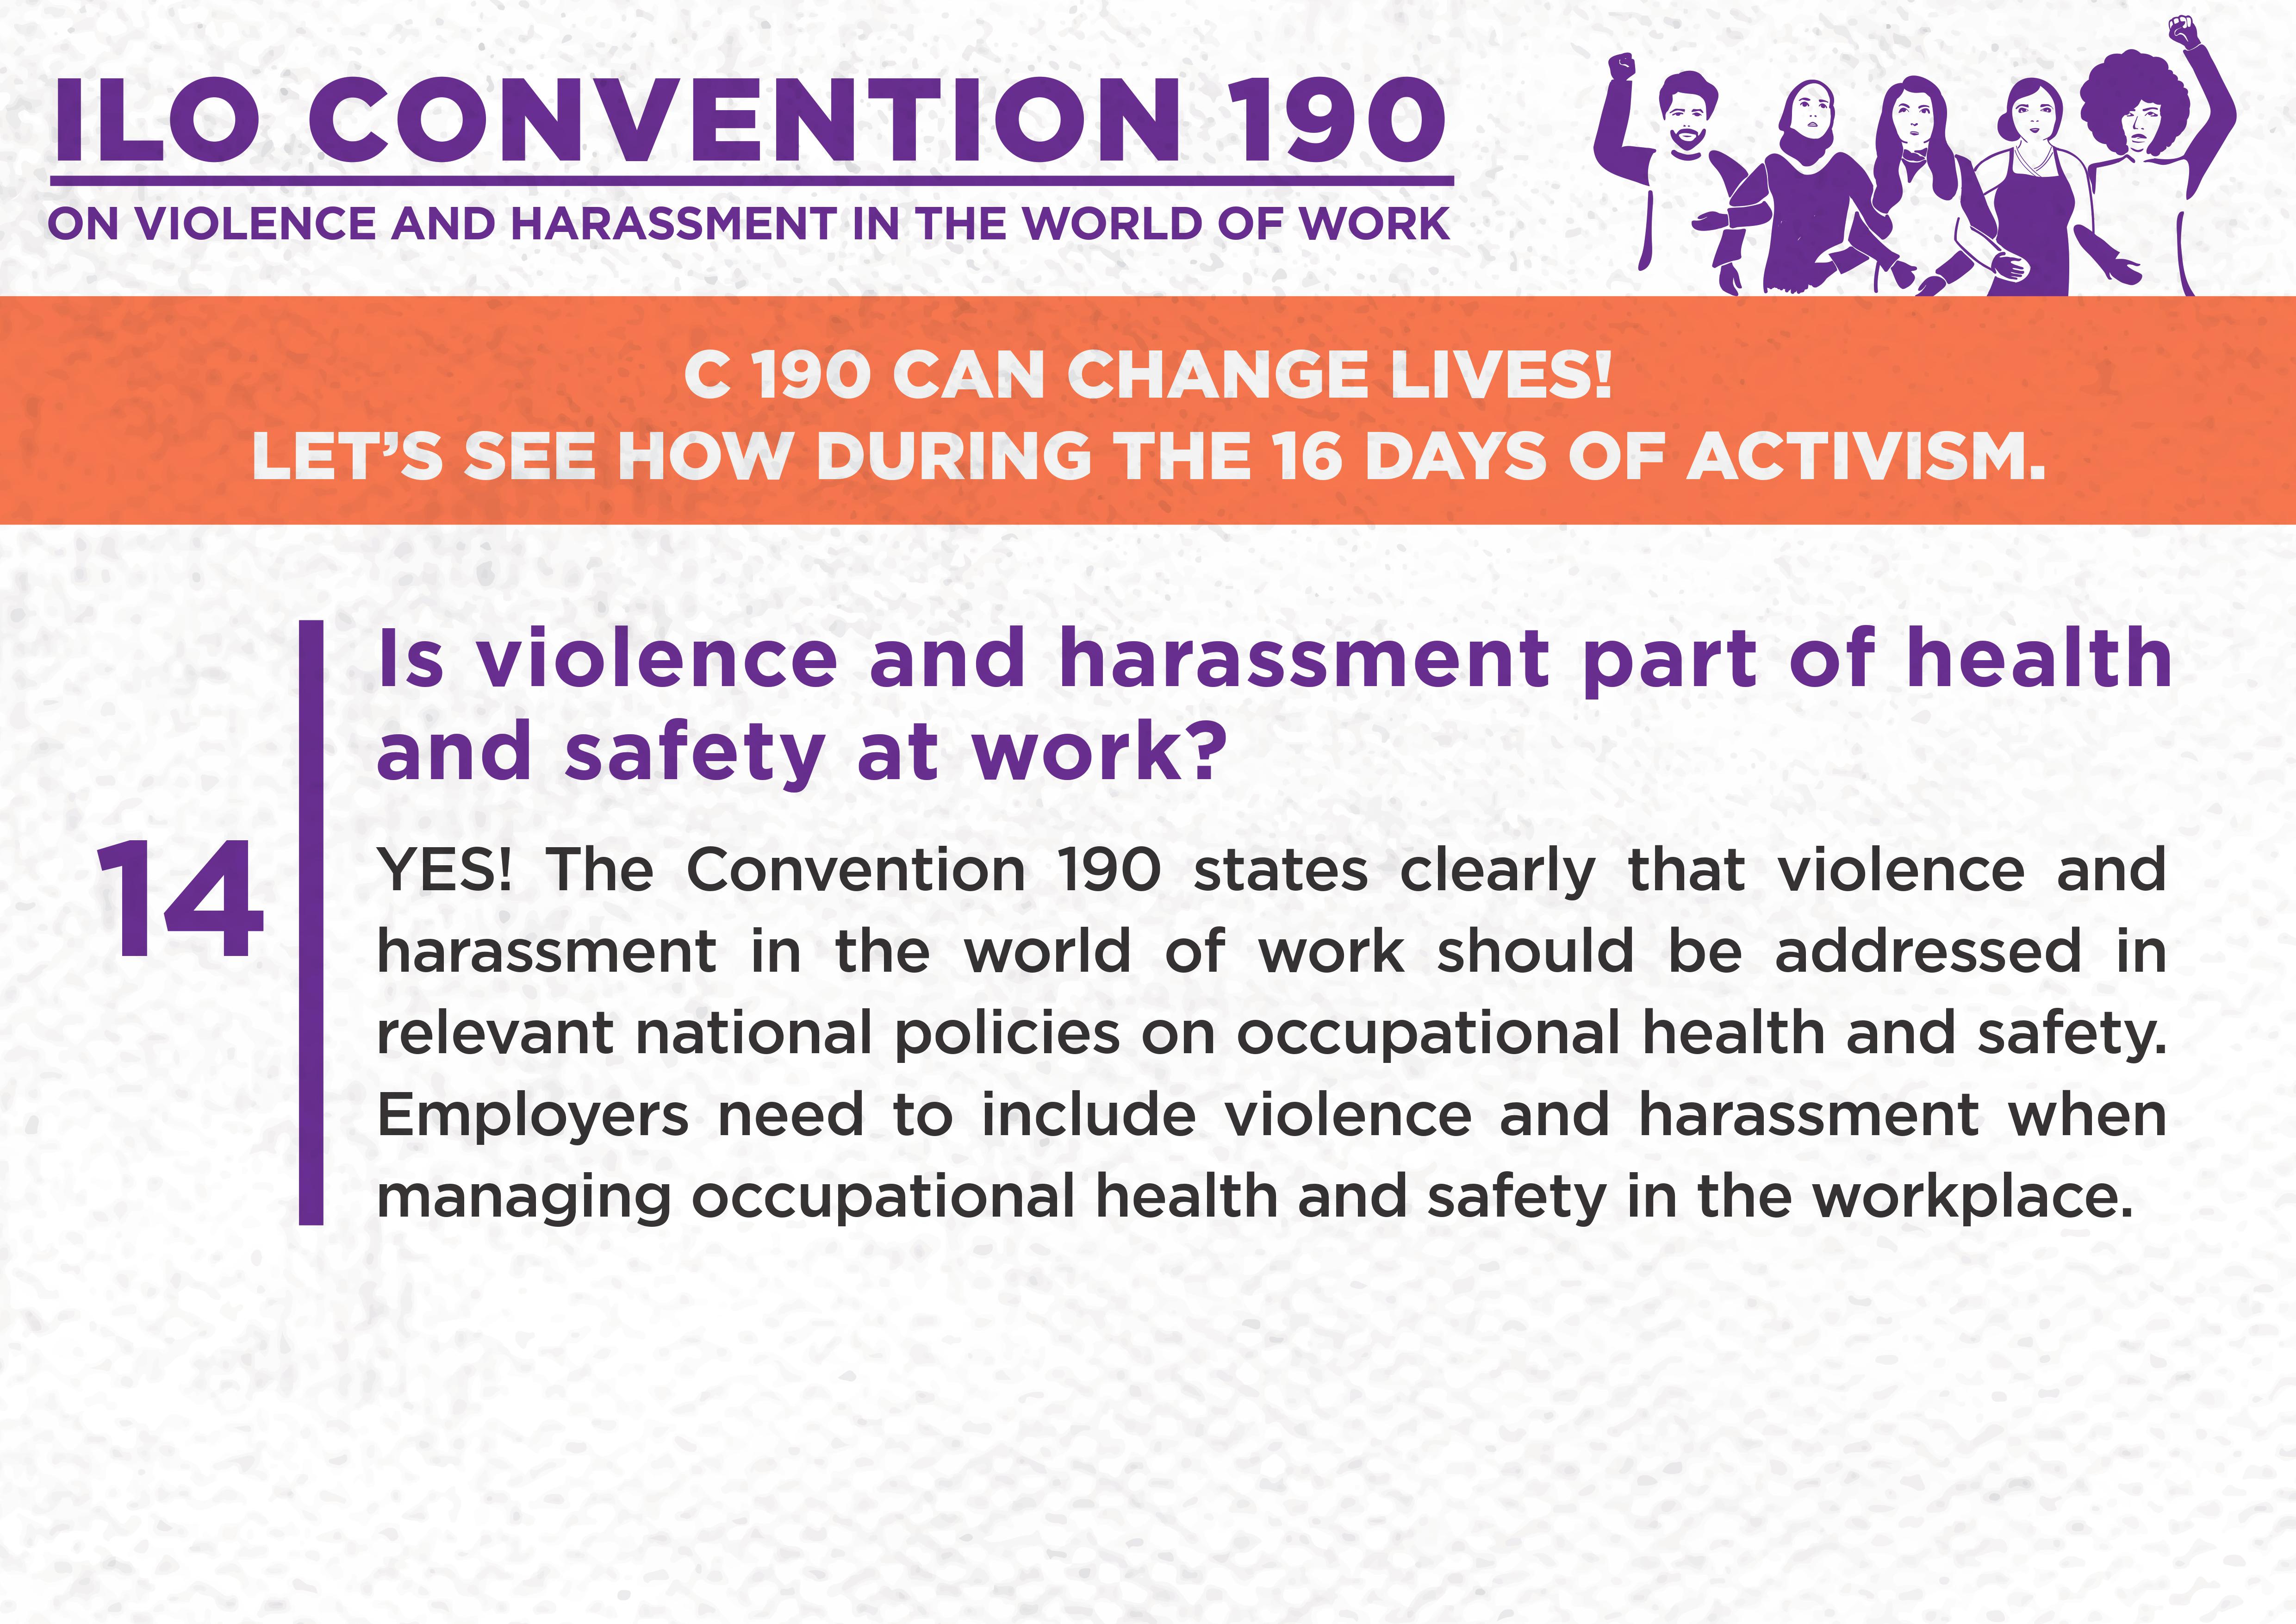 14. Is violence and harassment part of health and safety at work?